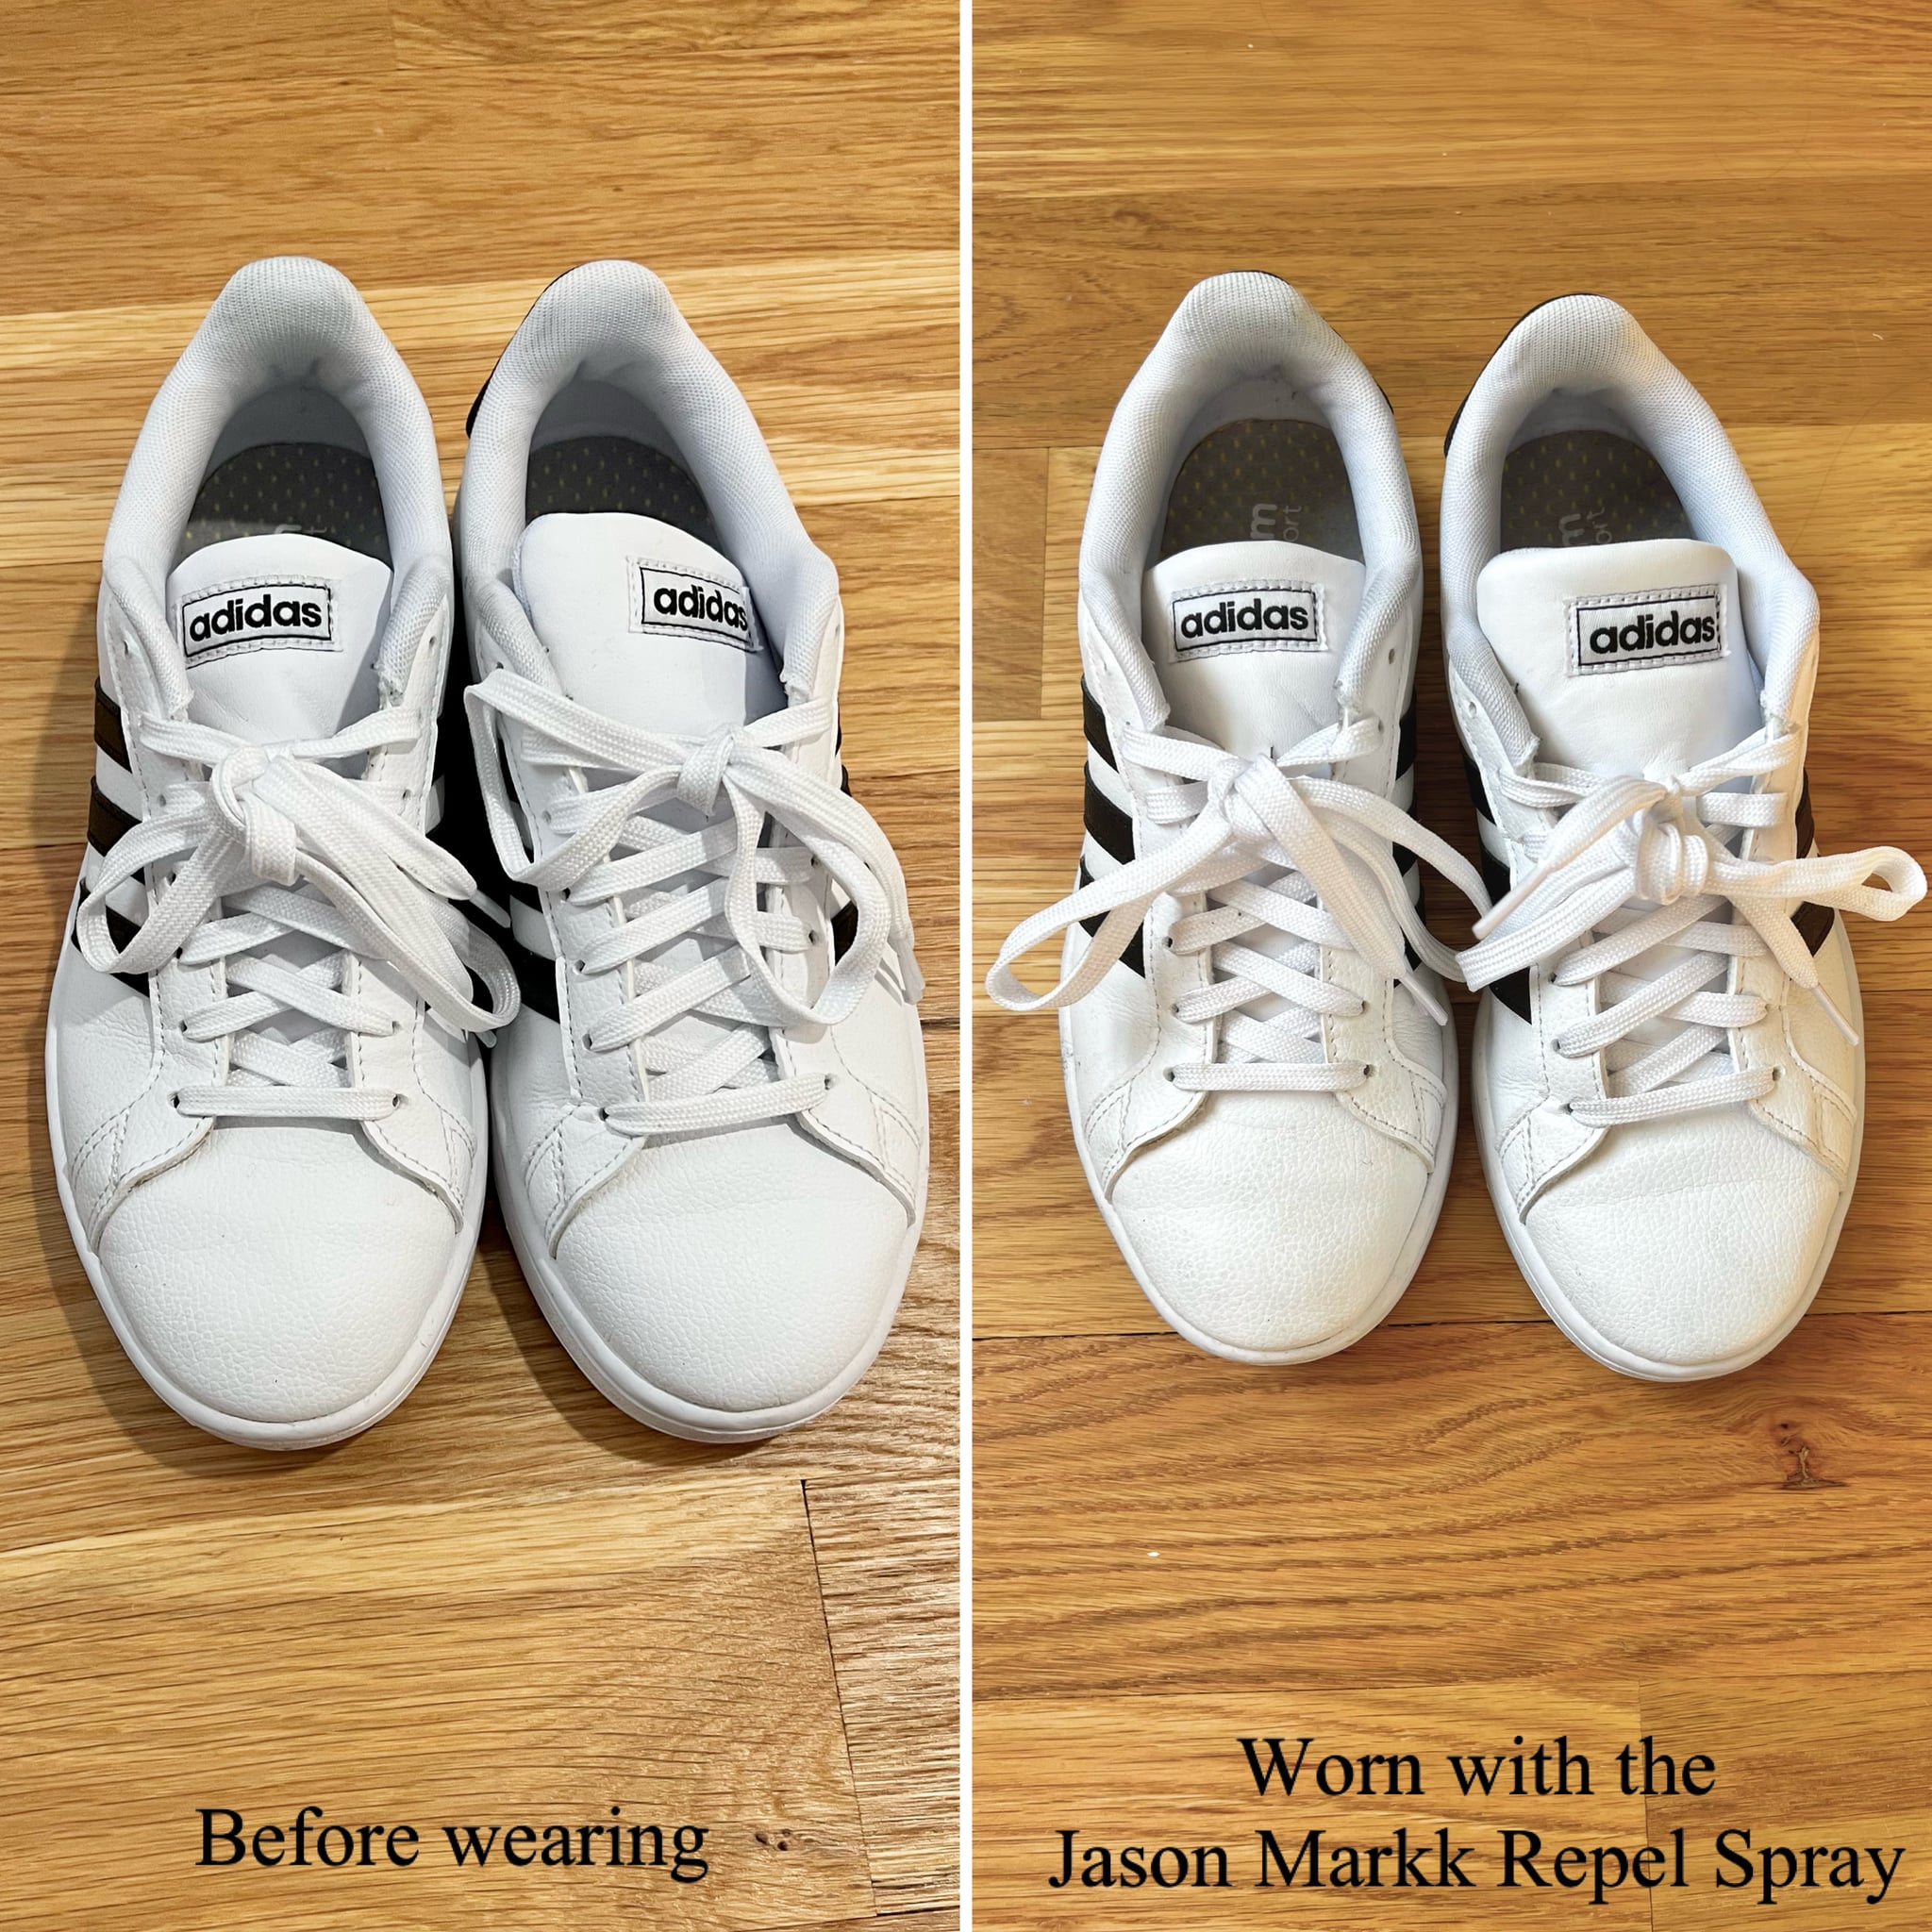 On the left is a pair of brand new white Adidas sneakers and on the right is the same pair worn around after spraying the Jason Markk Repel Spray.